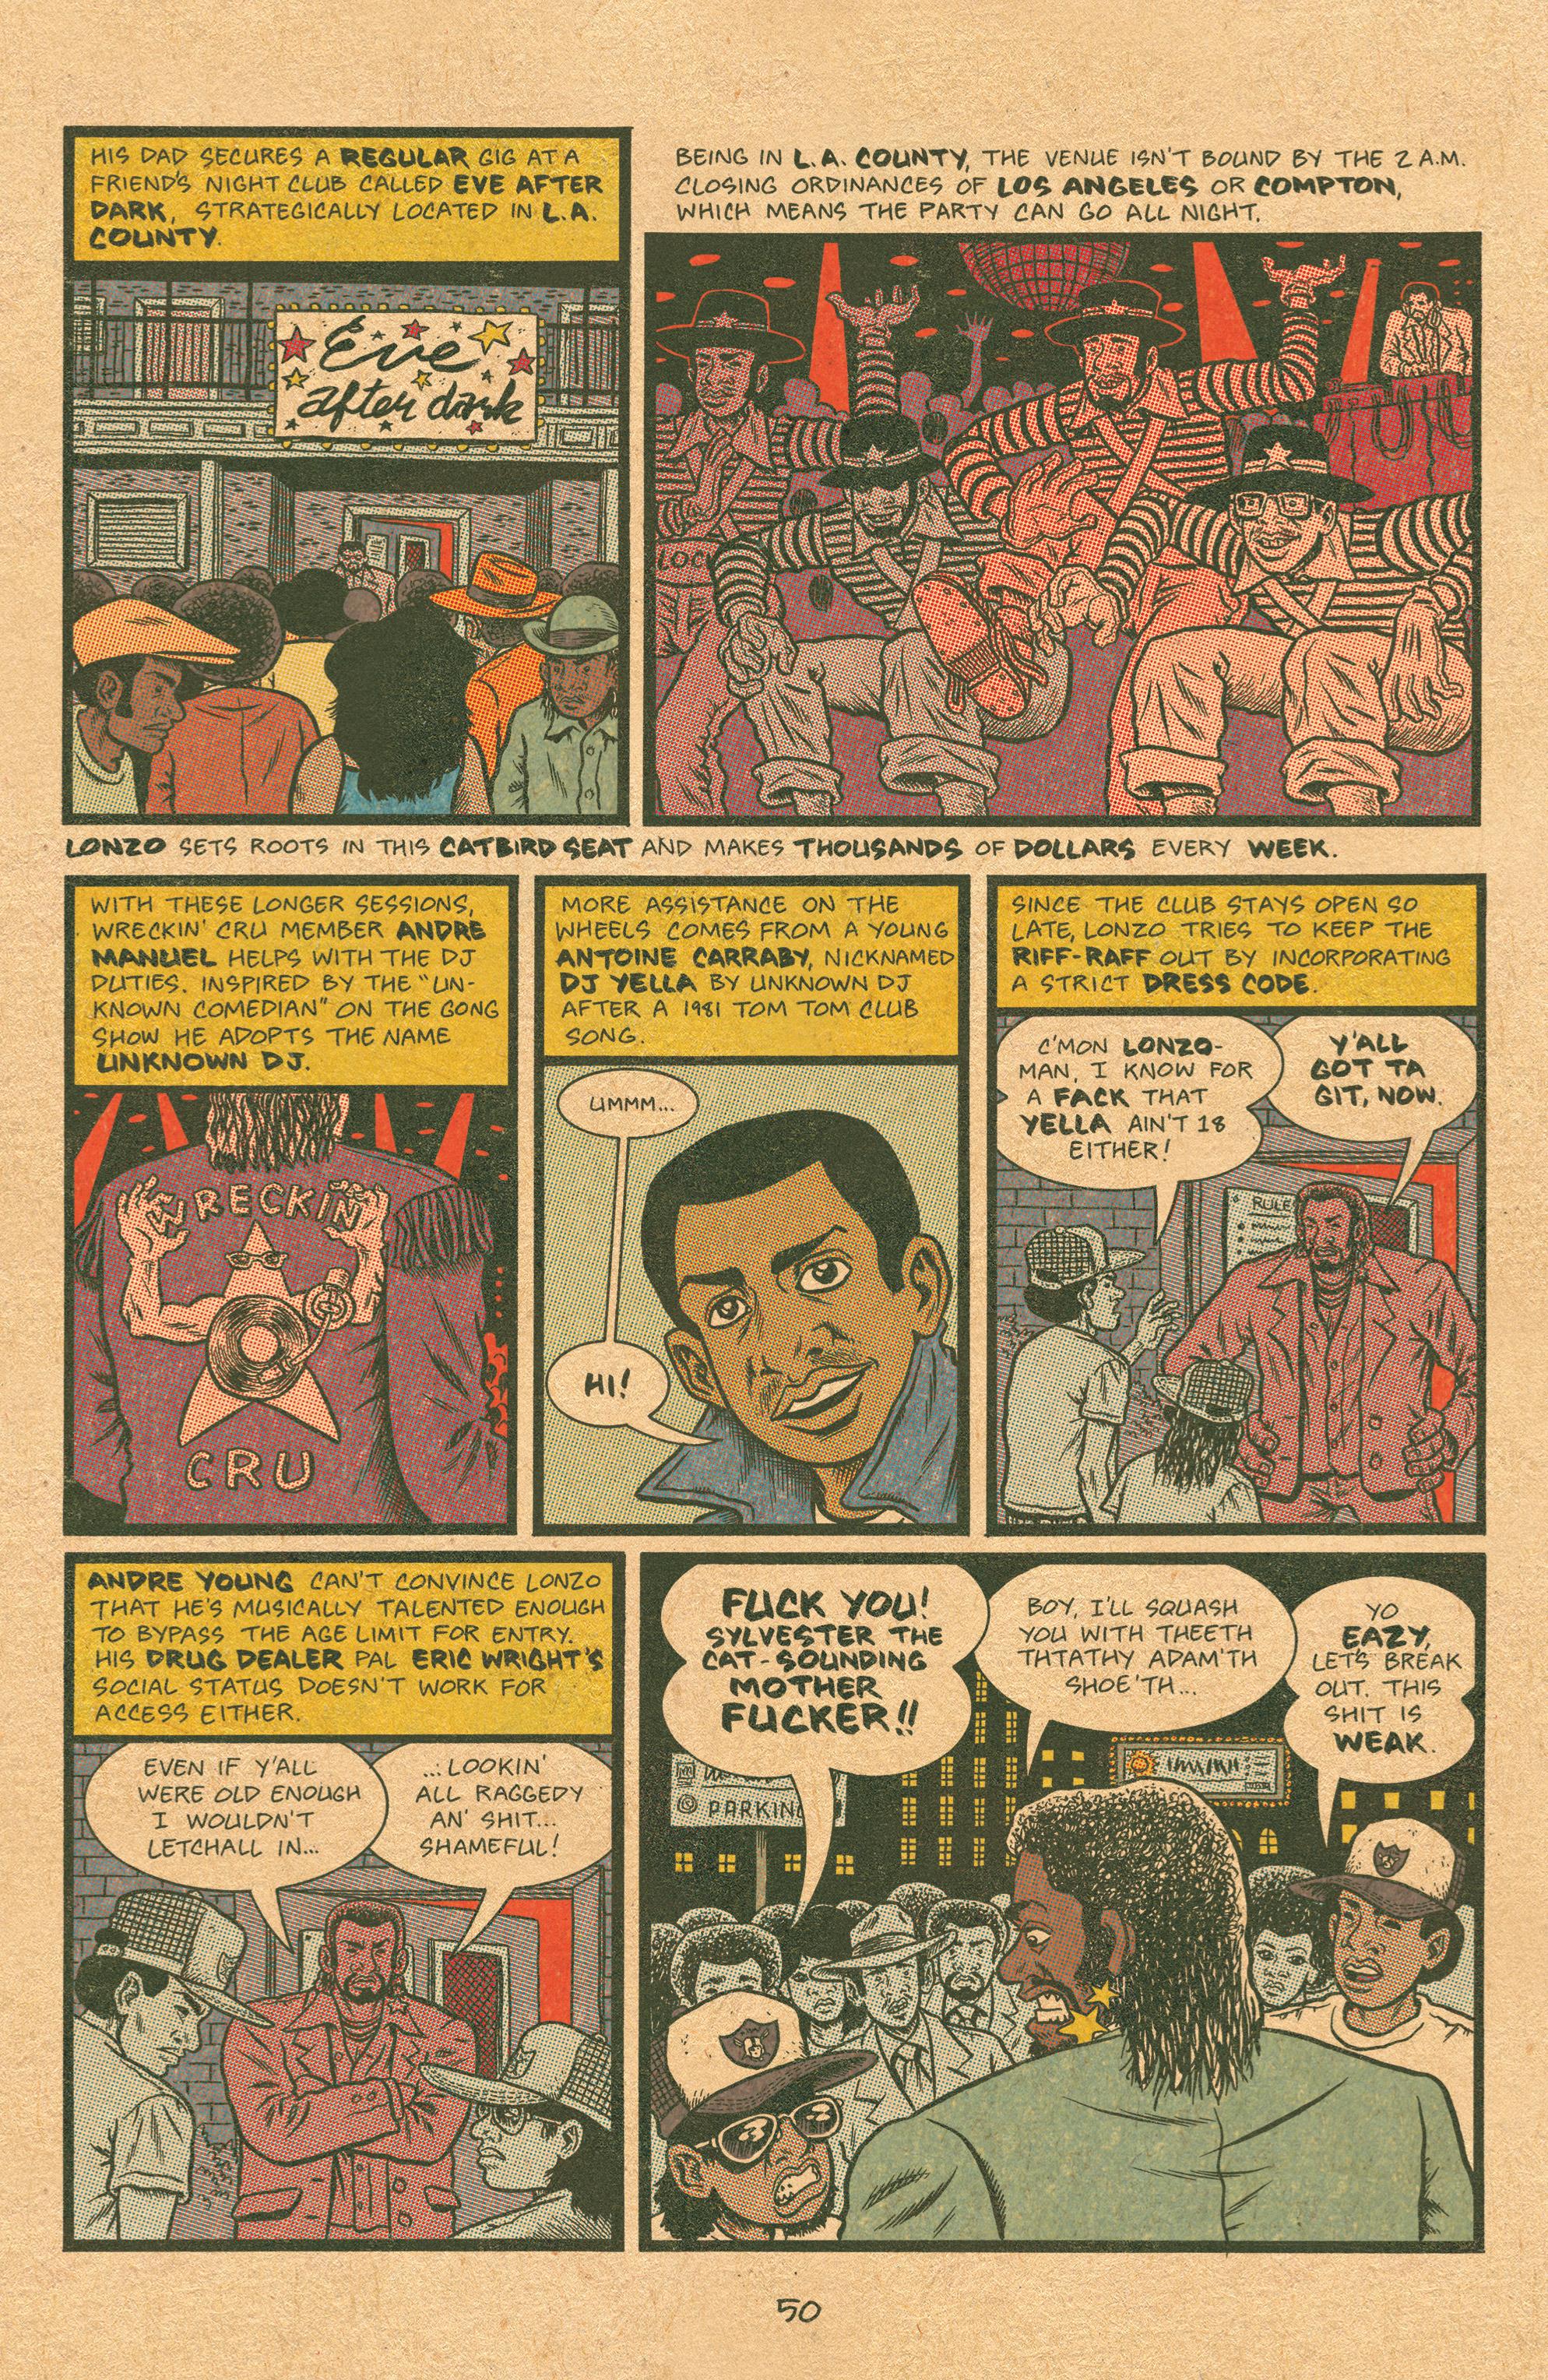 Read online Free Comic Book Day 2015 comic -  Issue # Hip Hop Family Tree Three-in-One - Featuring Cosplayers - 11